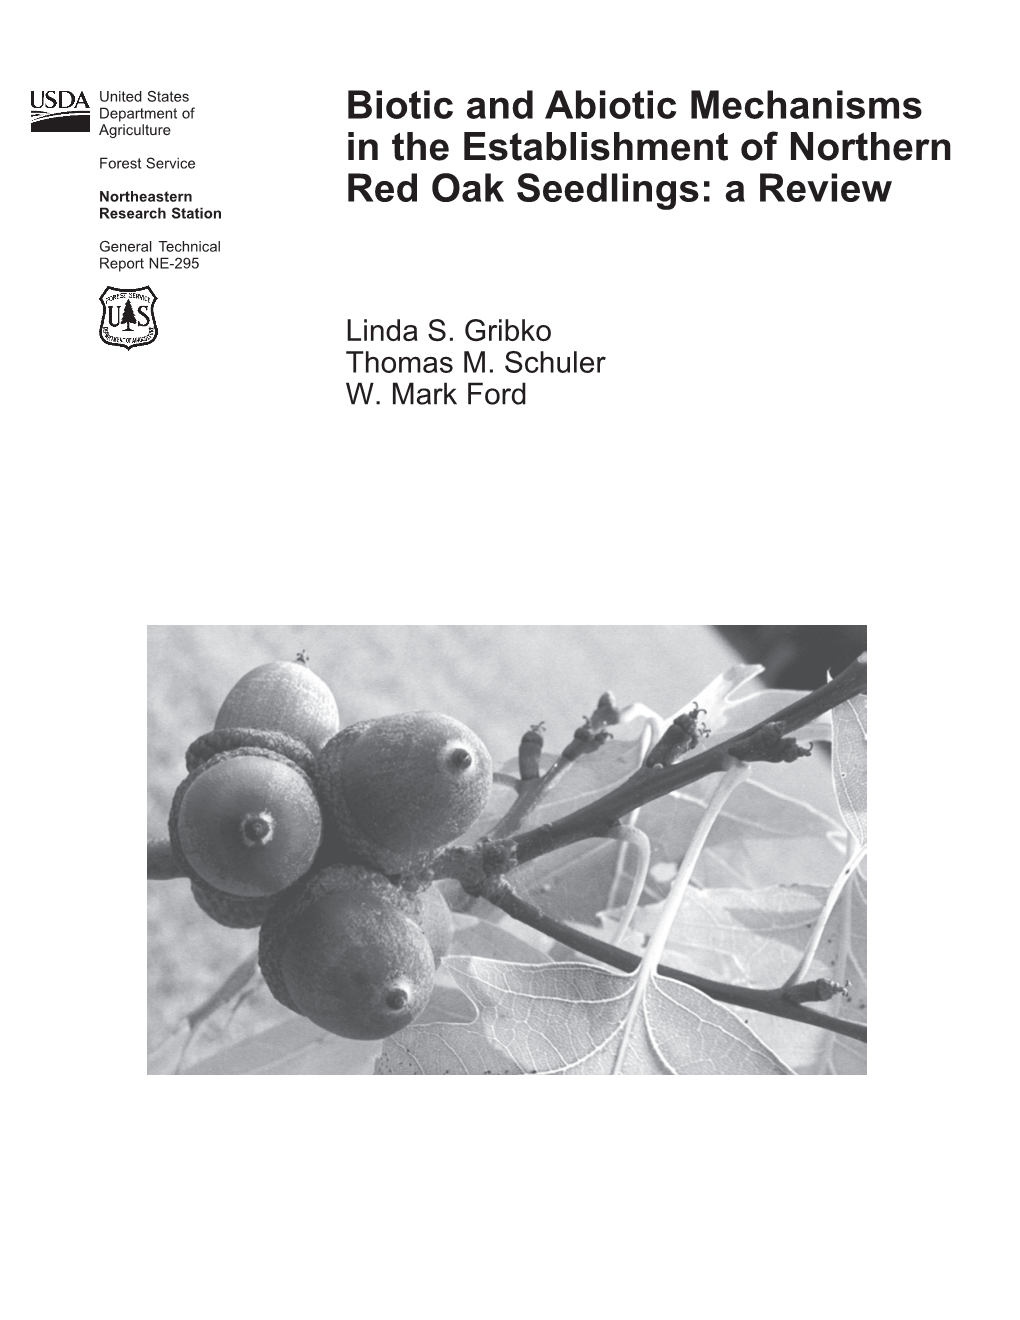 Biotic and Abiotic Mechanisms in the Establishment of Northern Red Oak Seedlings: a Review